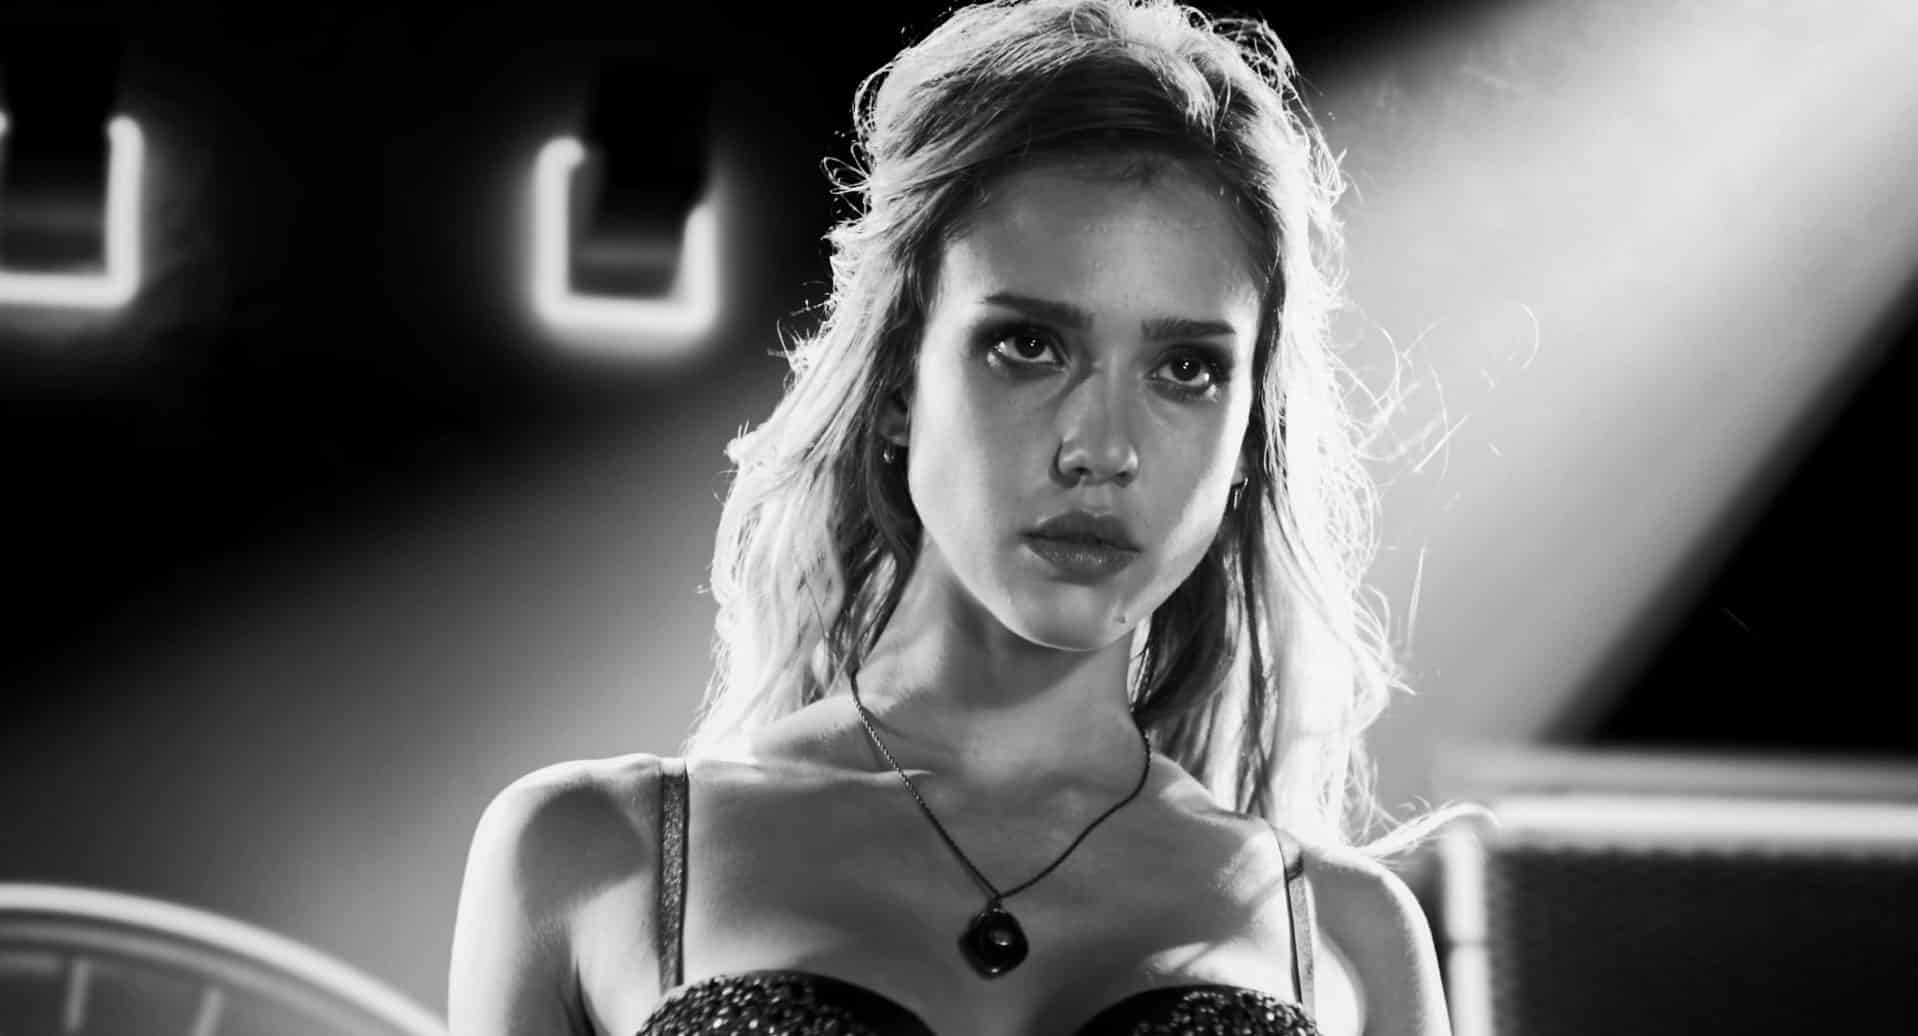 All You Like - Sin City 1080p BluRay x264 DTS 51 720p